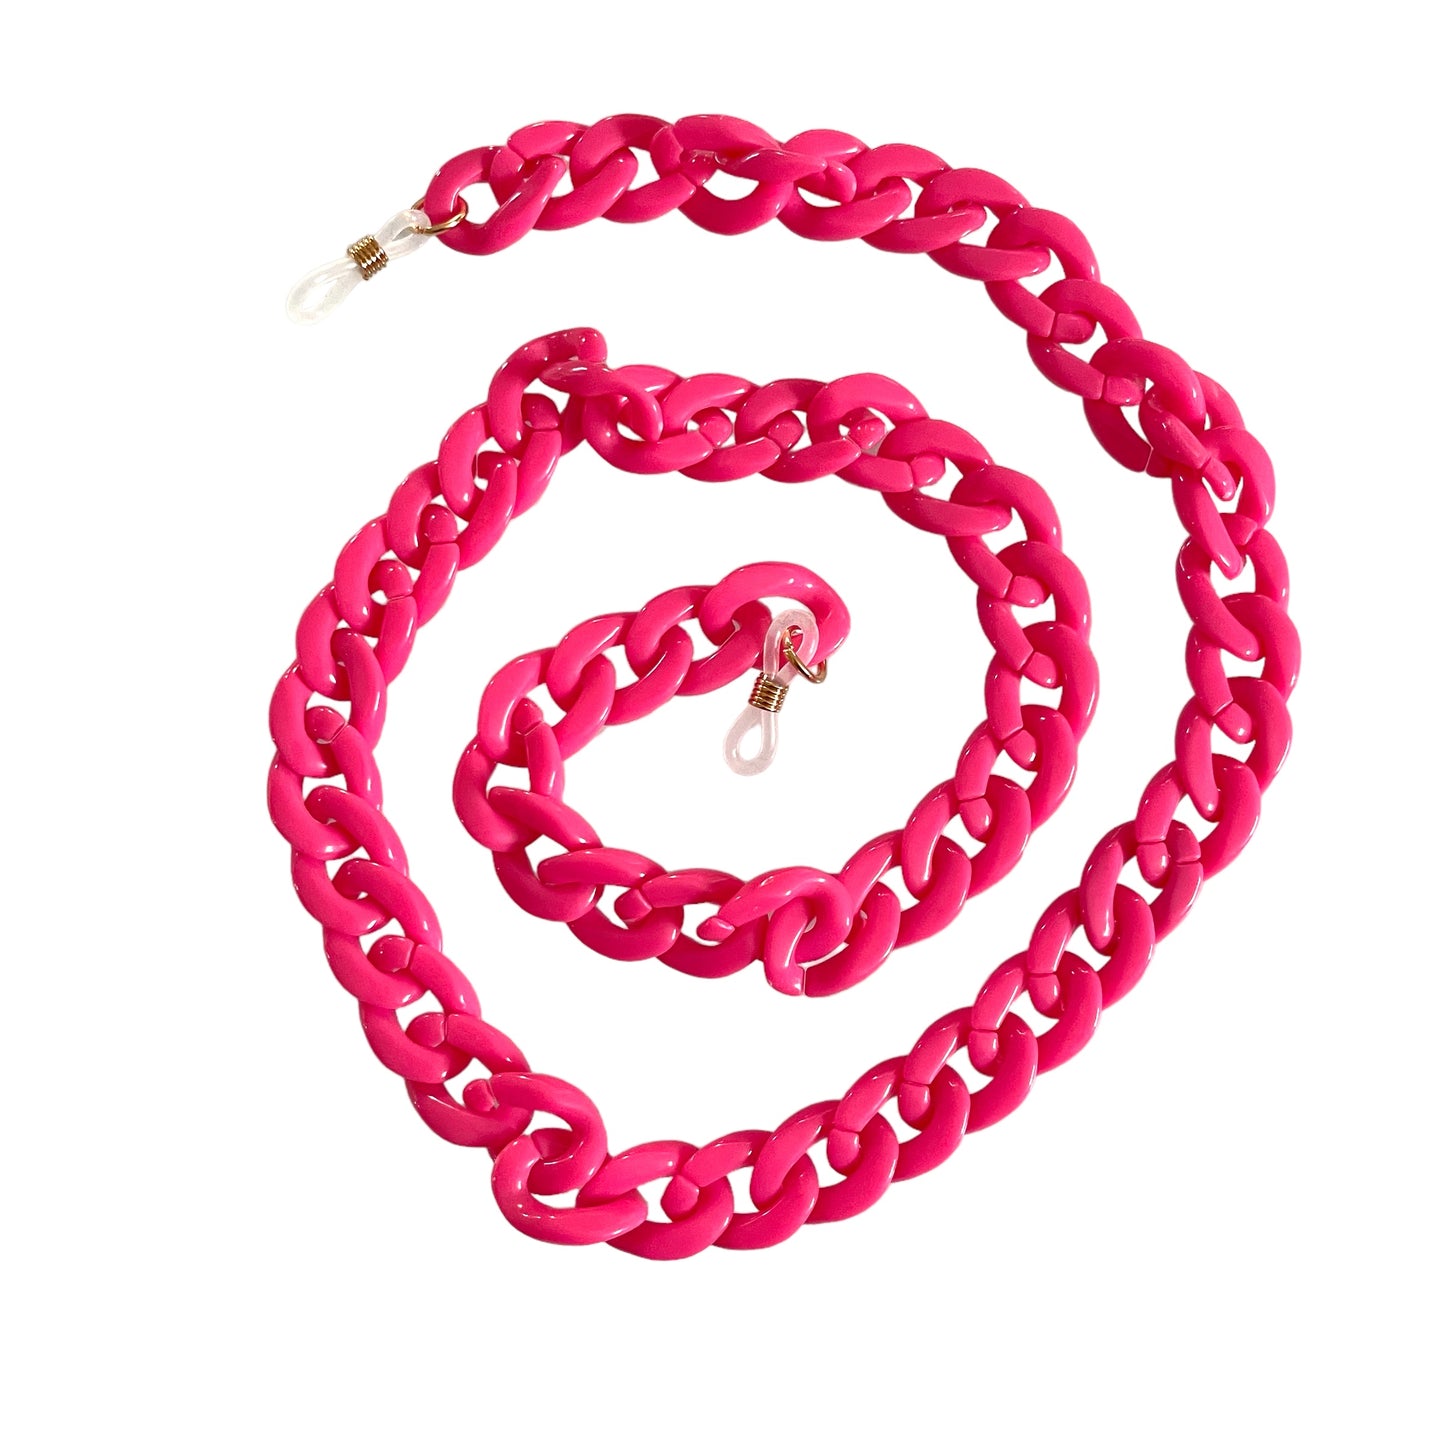 Layla - Recycled   Plastic Glasses / Sunglasses Chain - Pink